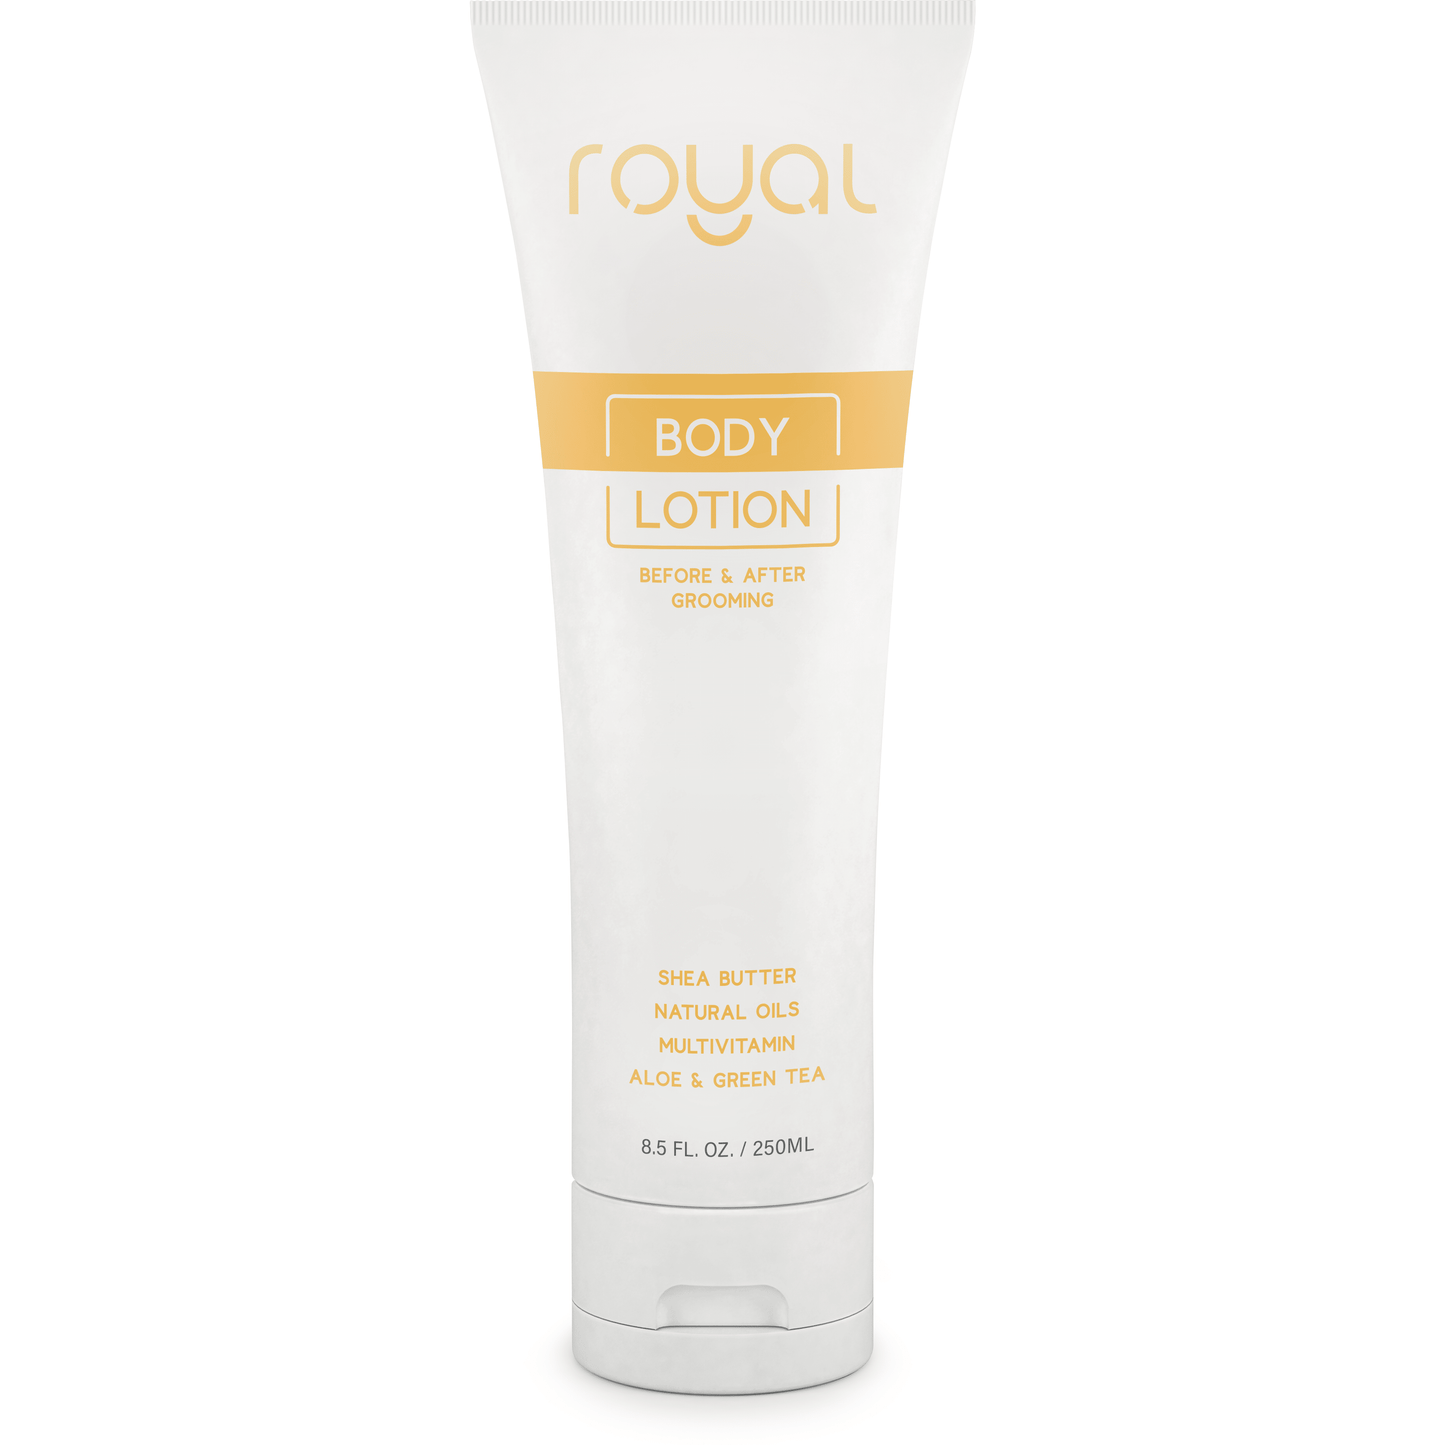 Intimate Grooming Lotion - Royal Intimacy